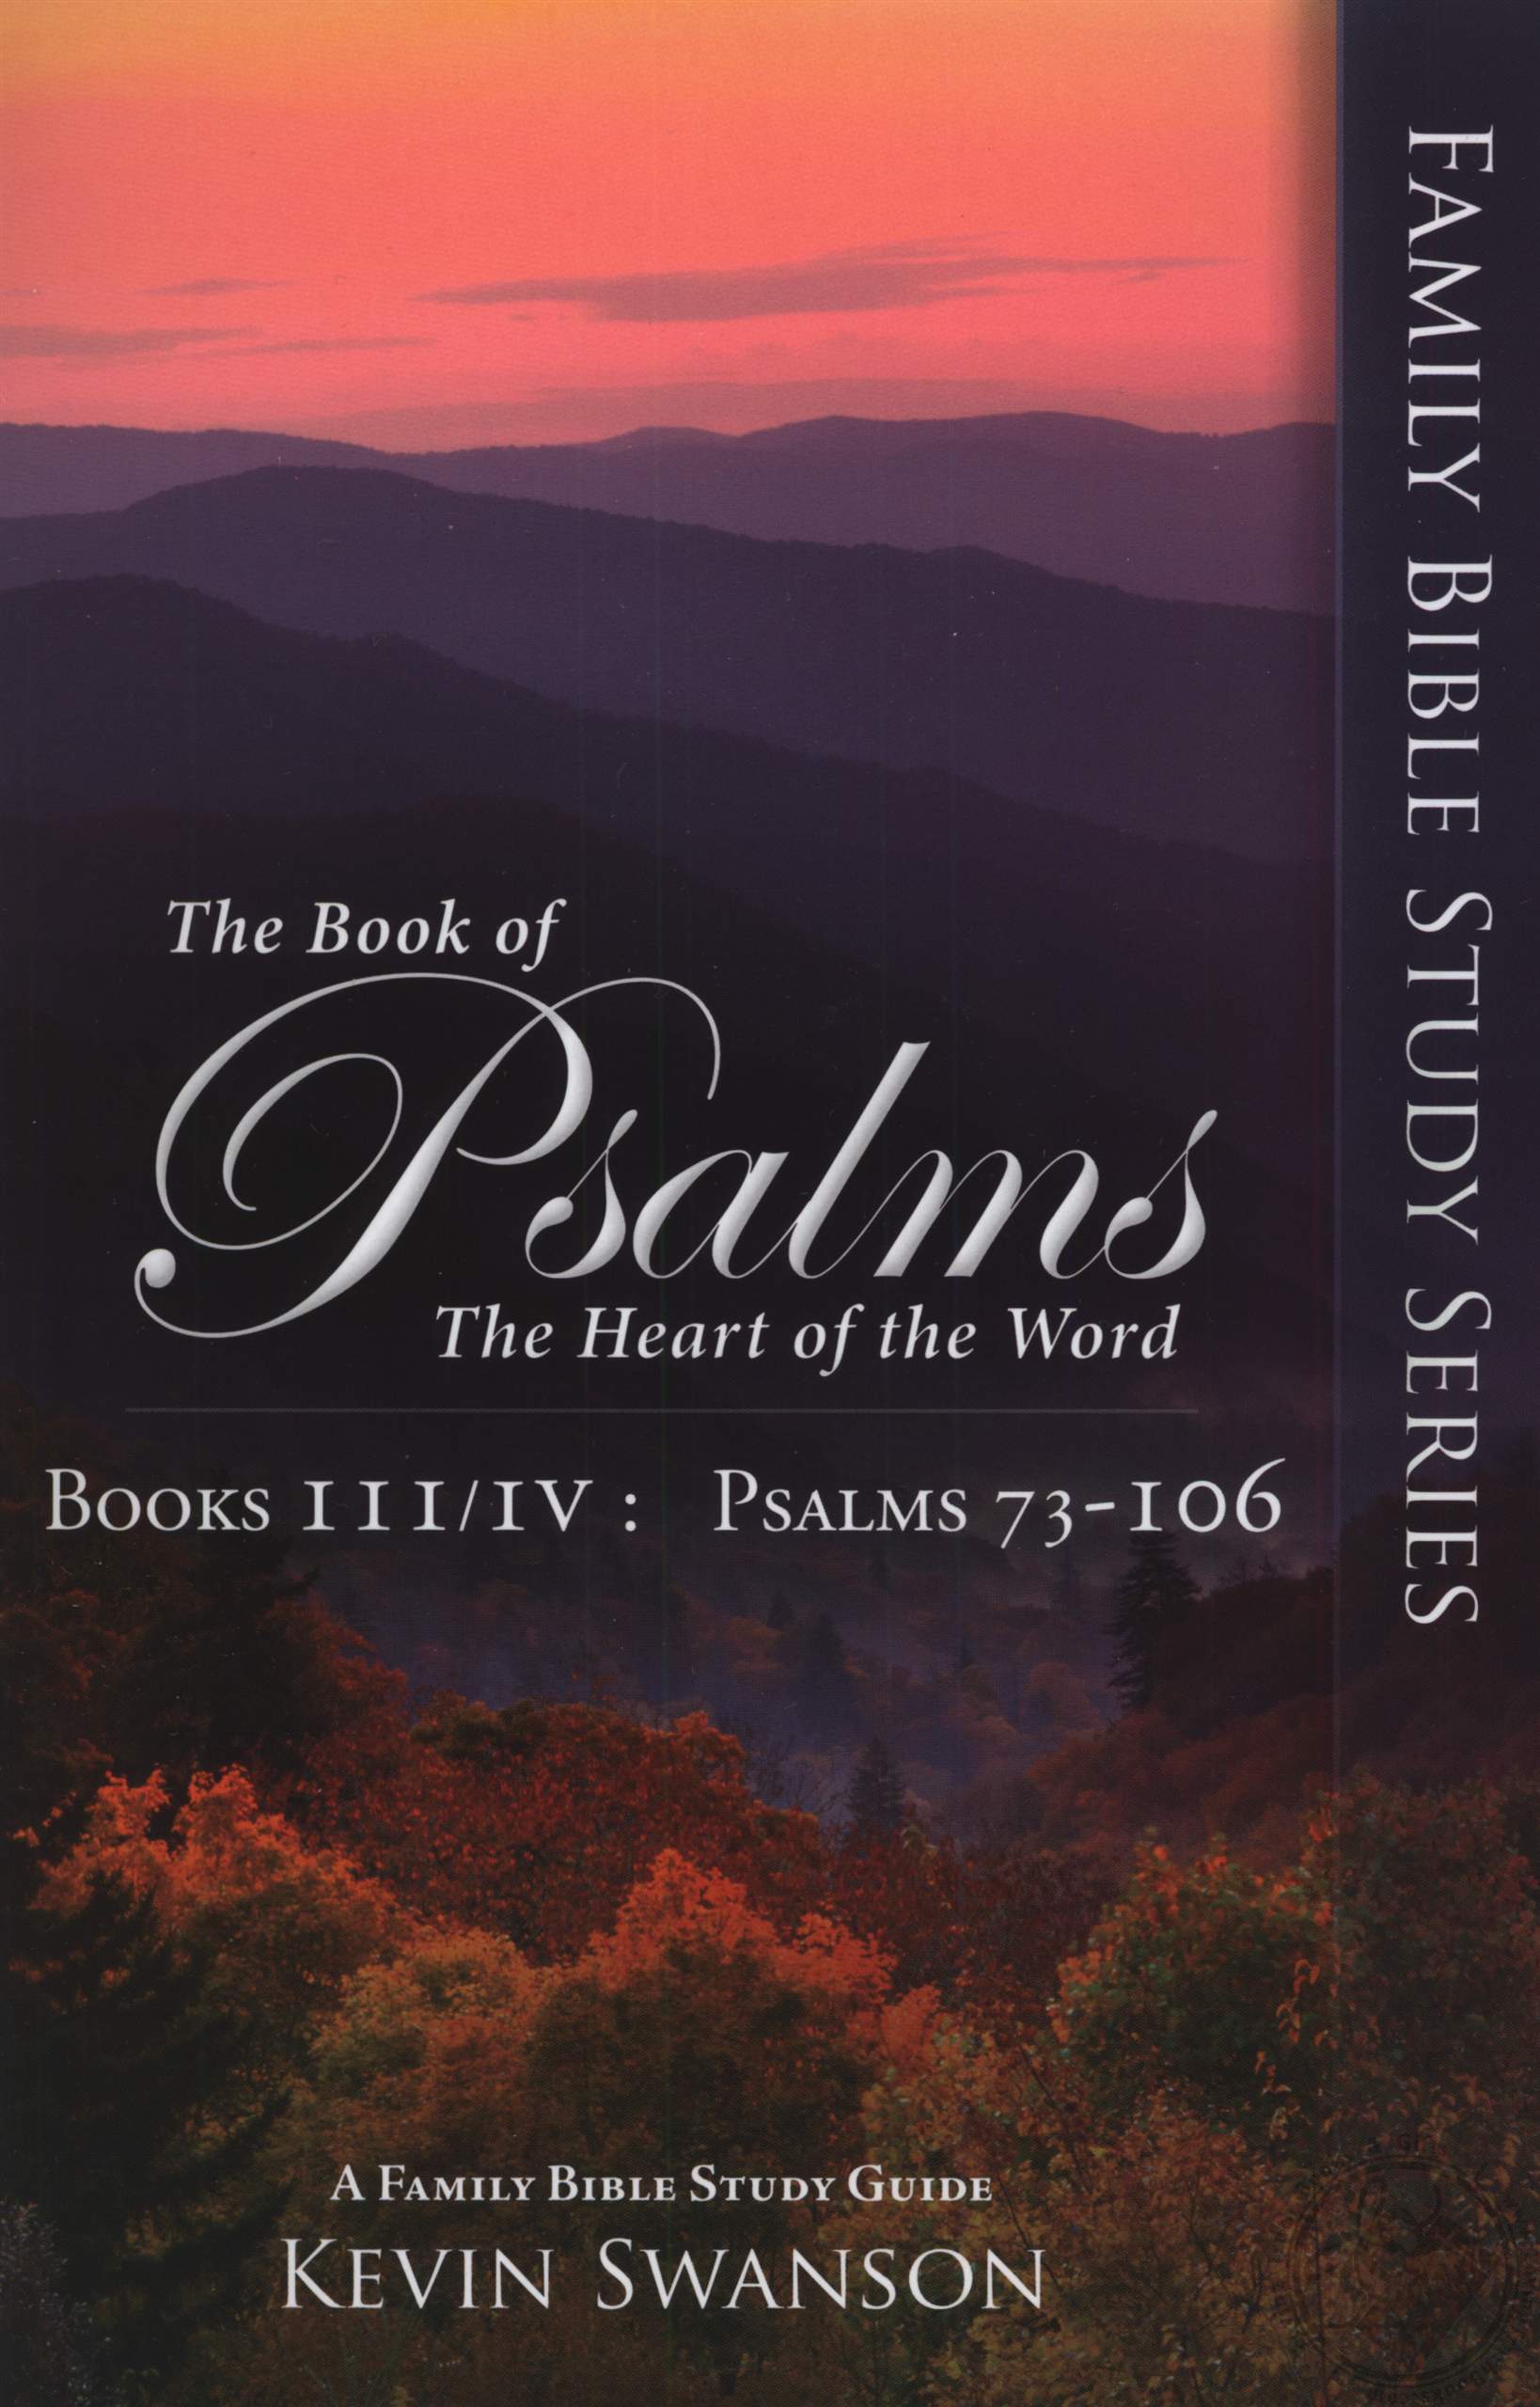 Set: The Book of Psalms: The Heart of the Word (Family Bible Study